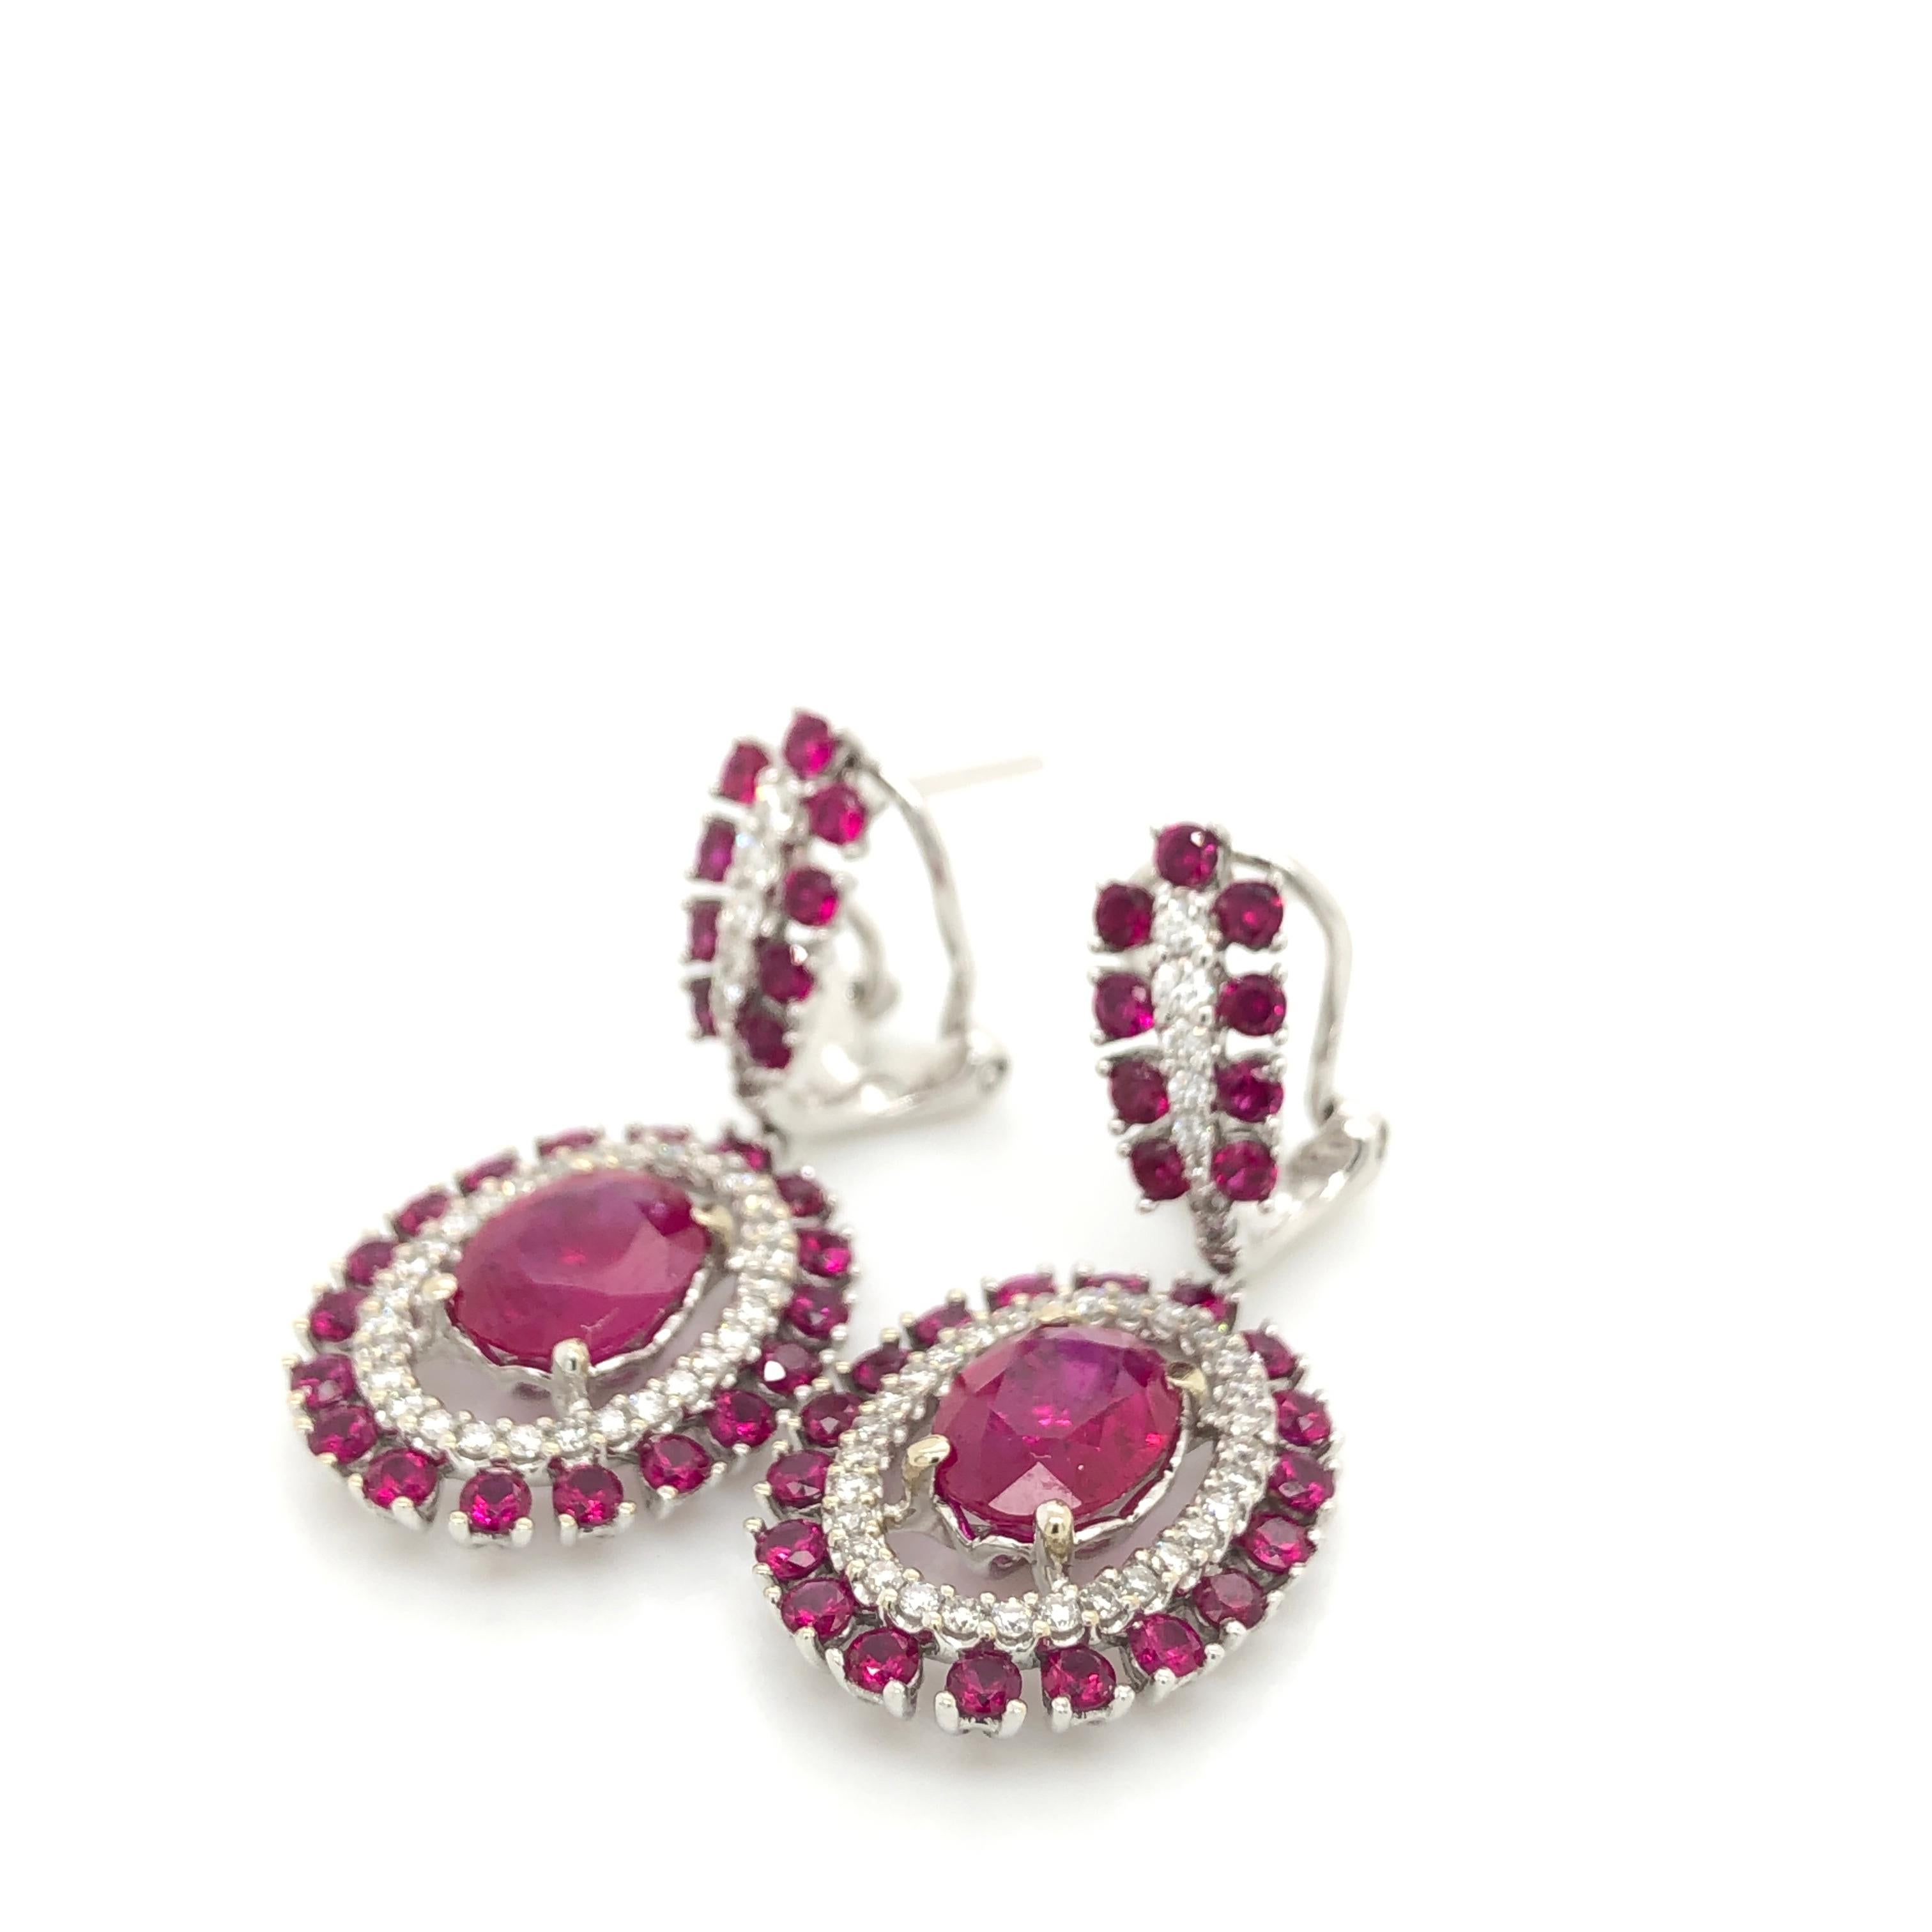 The gem of love and passion is beautifully displayed in these 18K Vanilla Gold Le Vian Couture Earrings featuring  4  1/4 cts. of Passion Ruby (the center rubies approximately 1-1/4 ct each) accented with 1/2 cts. t.w. Vanilla Diamonds.